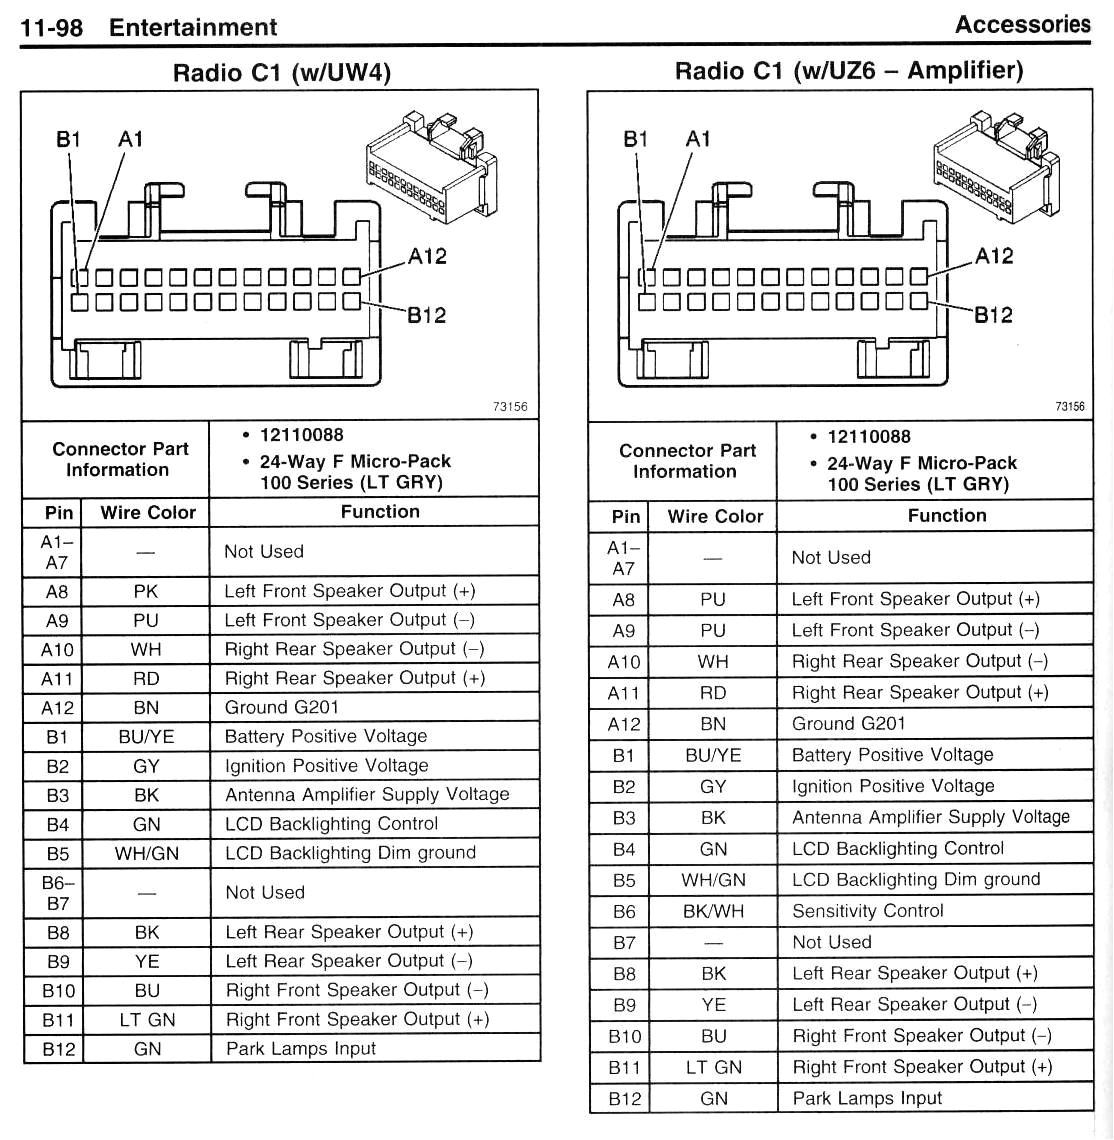 2005 chevy wiring harness wiring diagram centre 2006 chevy silverado radio wiring 05 silverado radio wiring